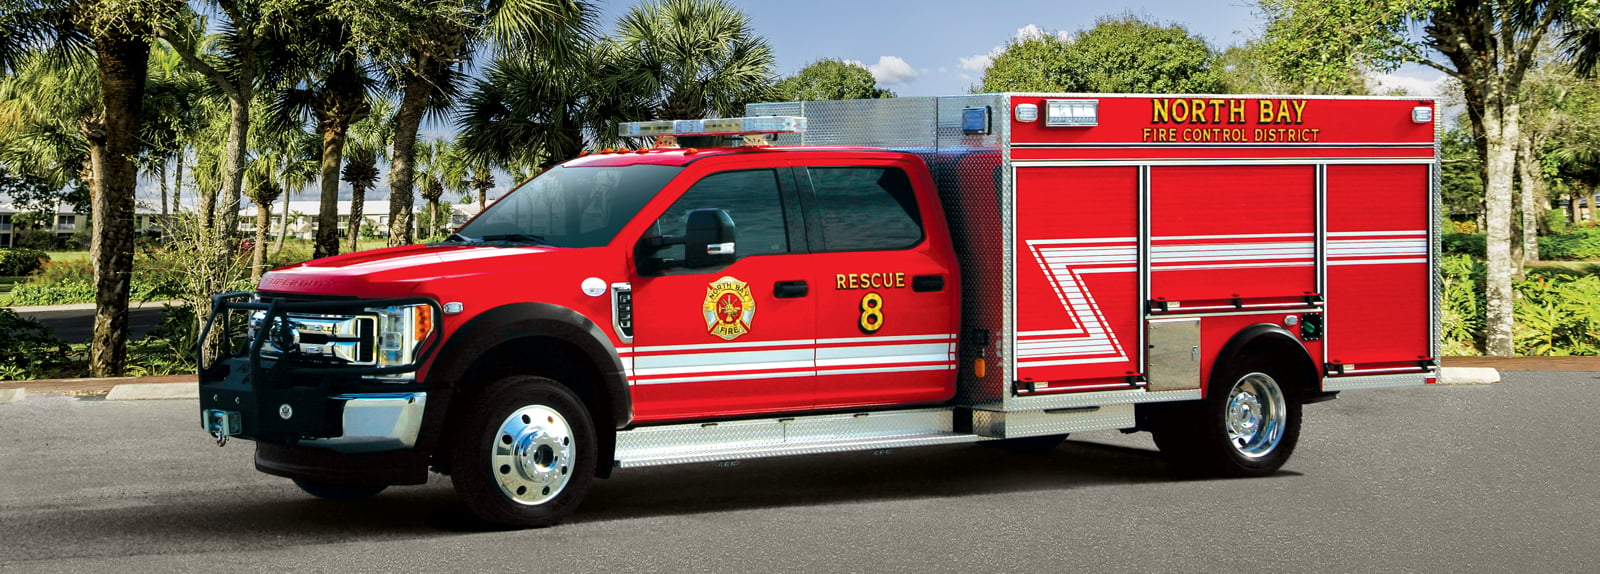 two types of fire trucks